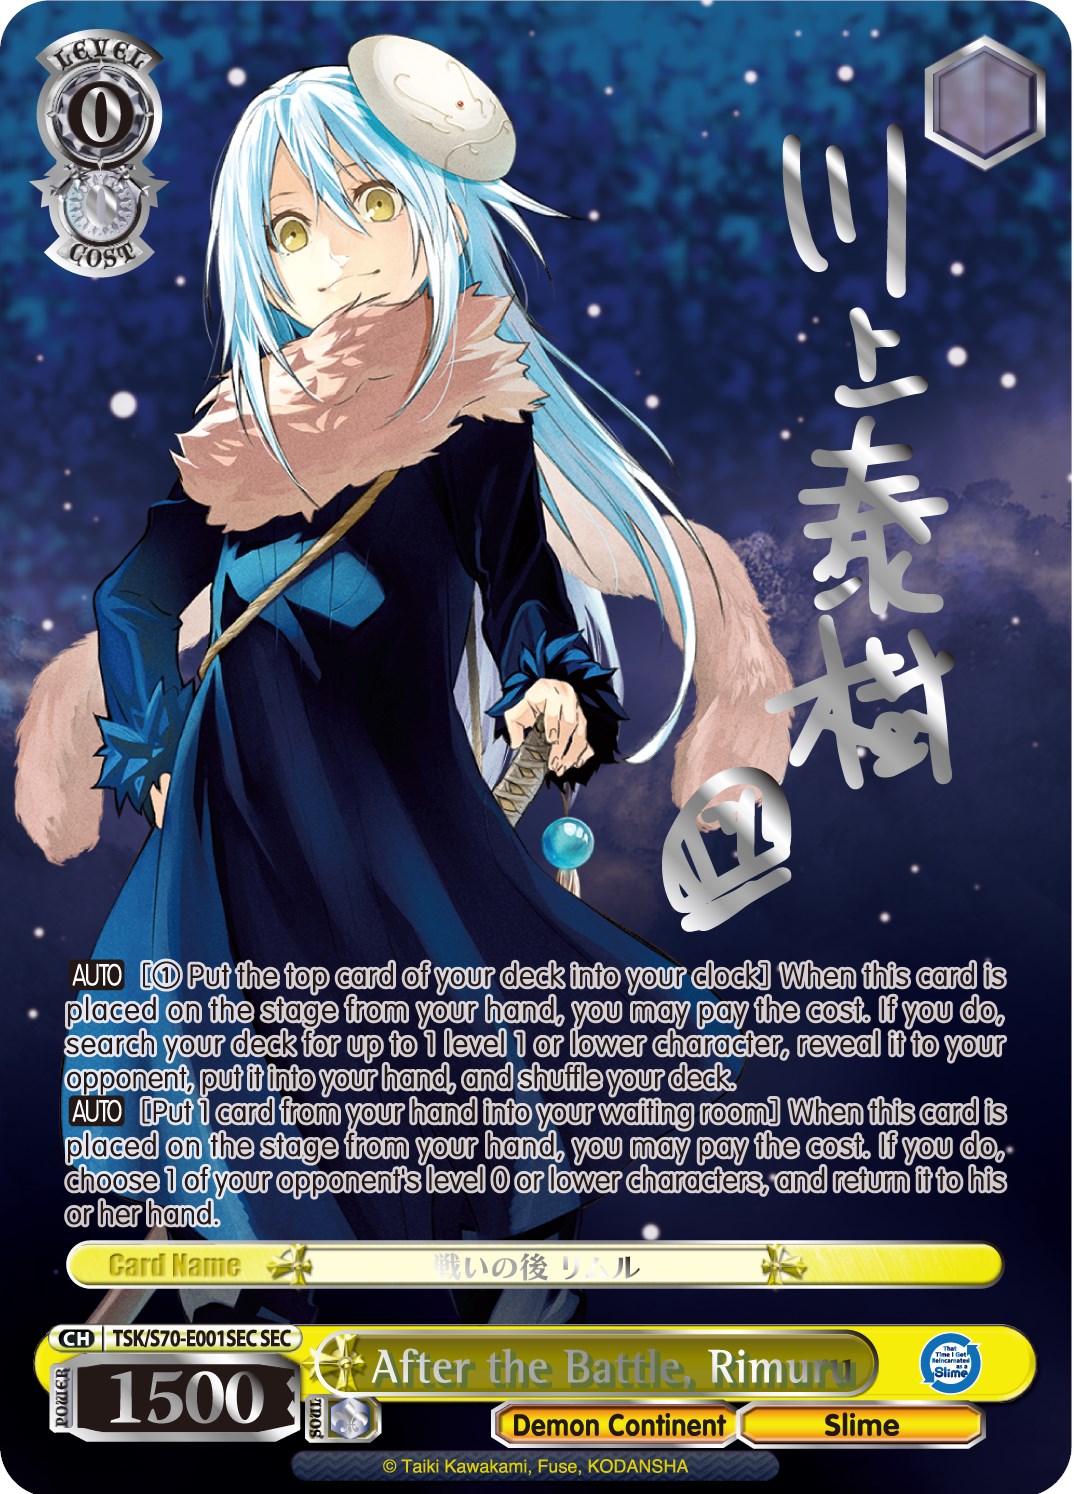 Tensei Shitara Slime Datta Ken Chapter 114 Release Date : Recap, Cast,  Review, Spoilers, Streaming, Schedule & Where To Watch? - SarkariResult